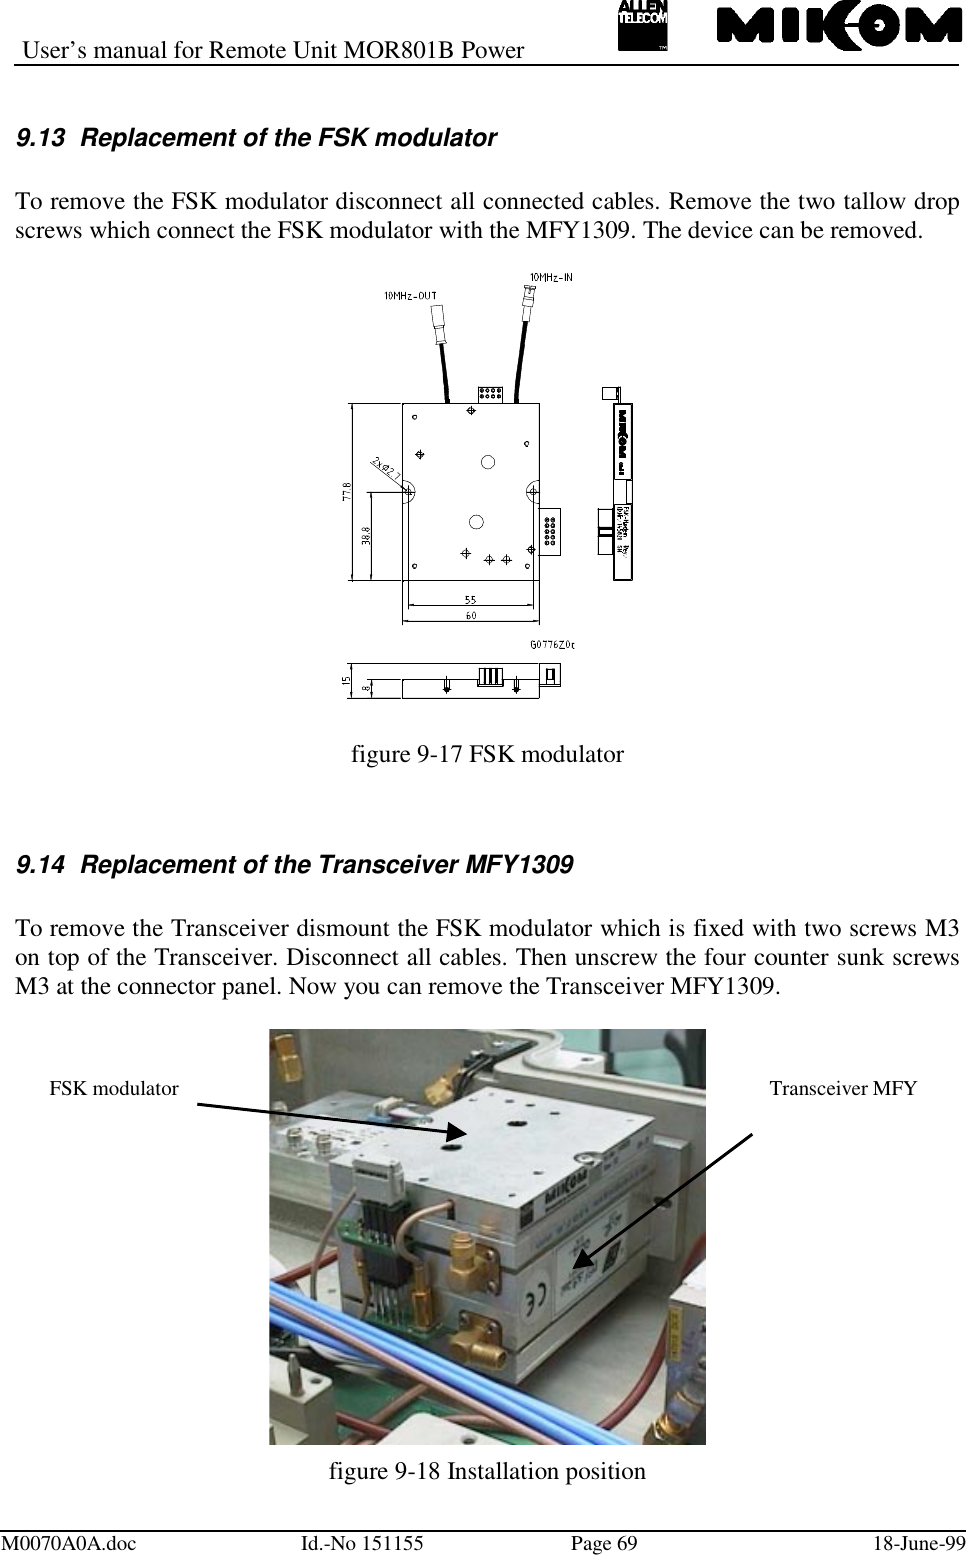 User’s manual for Remote Unit MOR801B PowerM0070A0A.doc Id.-No 151155 Page 69 18-June-999.13  Replacement of the FSK modulatorTo remove the FSK modulator disconnect all connected cables. Remove the two tallow dropscrews which connect the FSK modulator with the MFY1309. The device can be removed.figure 9-17 FSK modulator9.14  Replacement of the Transceiver MFY1309To remove the Transceiver dismount the FSK modulator which is fixed with two screws M3on top of the Transceiver. Disconnect all cables. Then unscrew the four counter sunk screwsM3 at the connector panel. Now you can remove the Transceiver MFY1309.figure 9-18 Installation positionTransceiver MFYFSK modulator